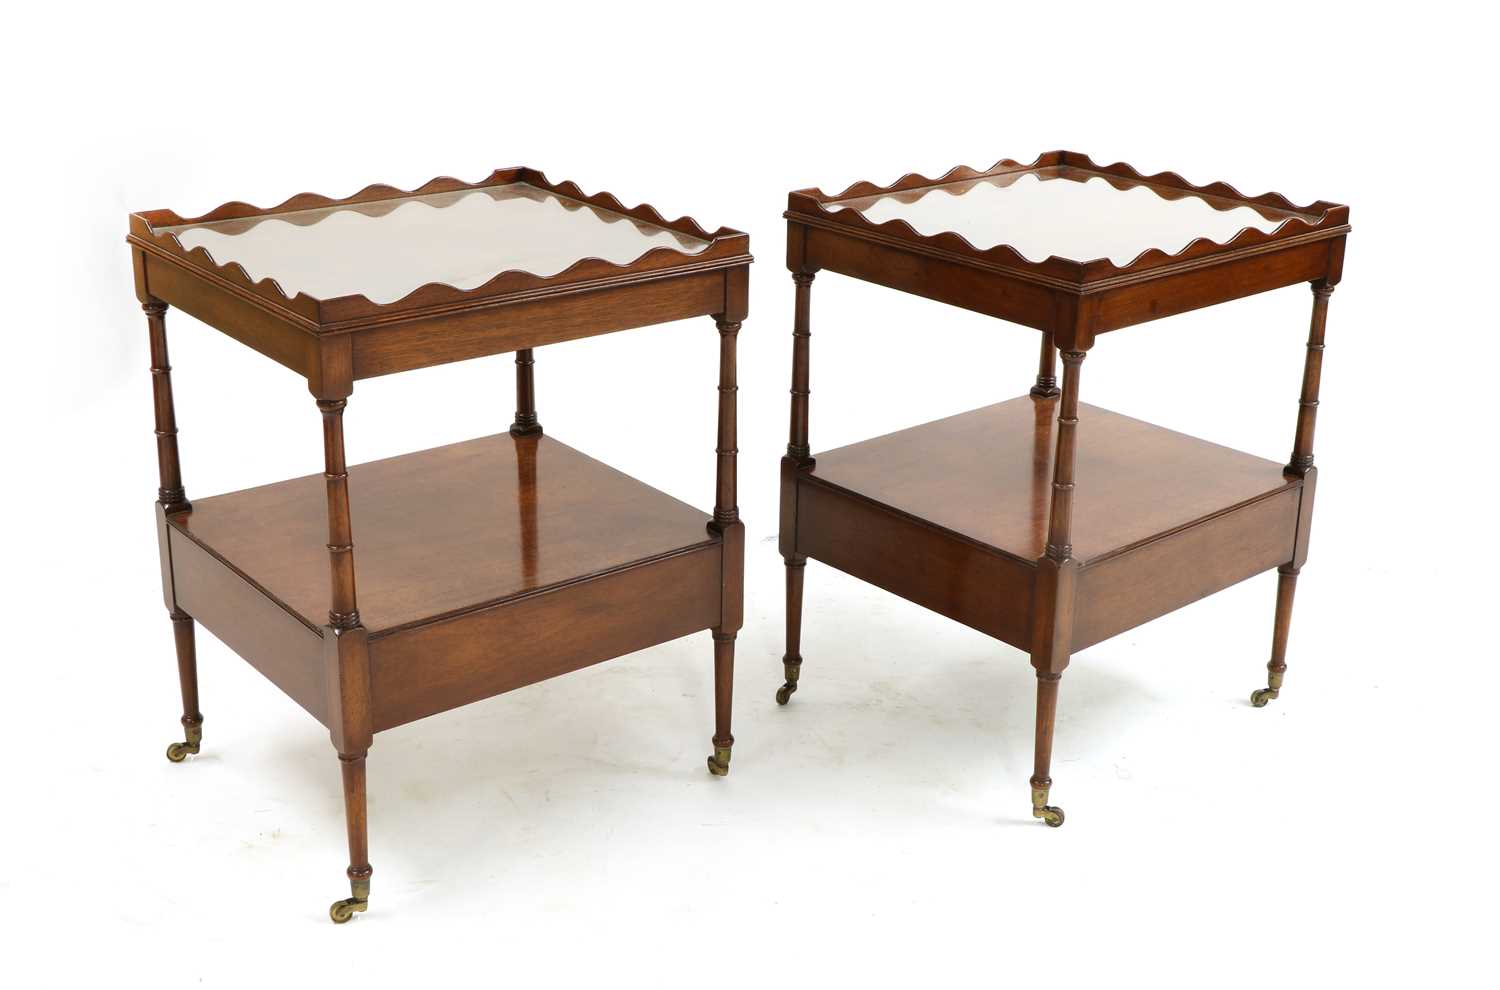 A pair of Regency style mahogany bedside tables, - Image 3 of 5